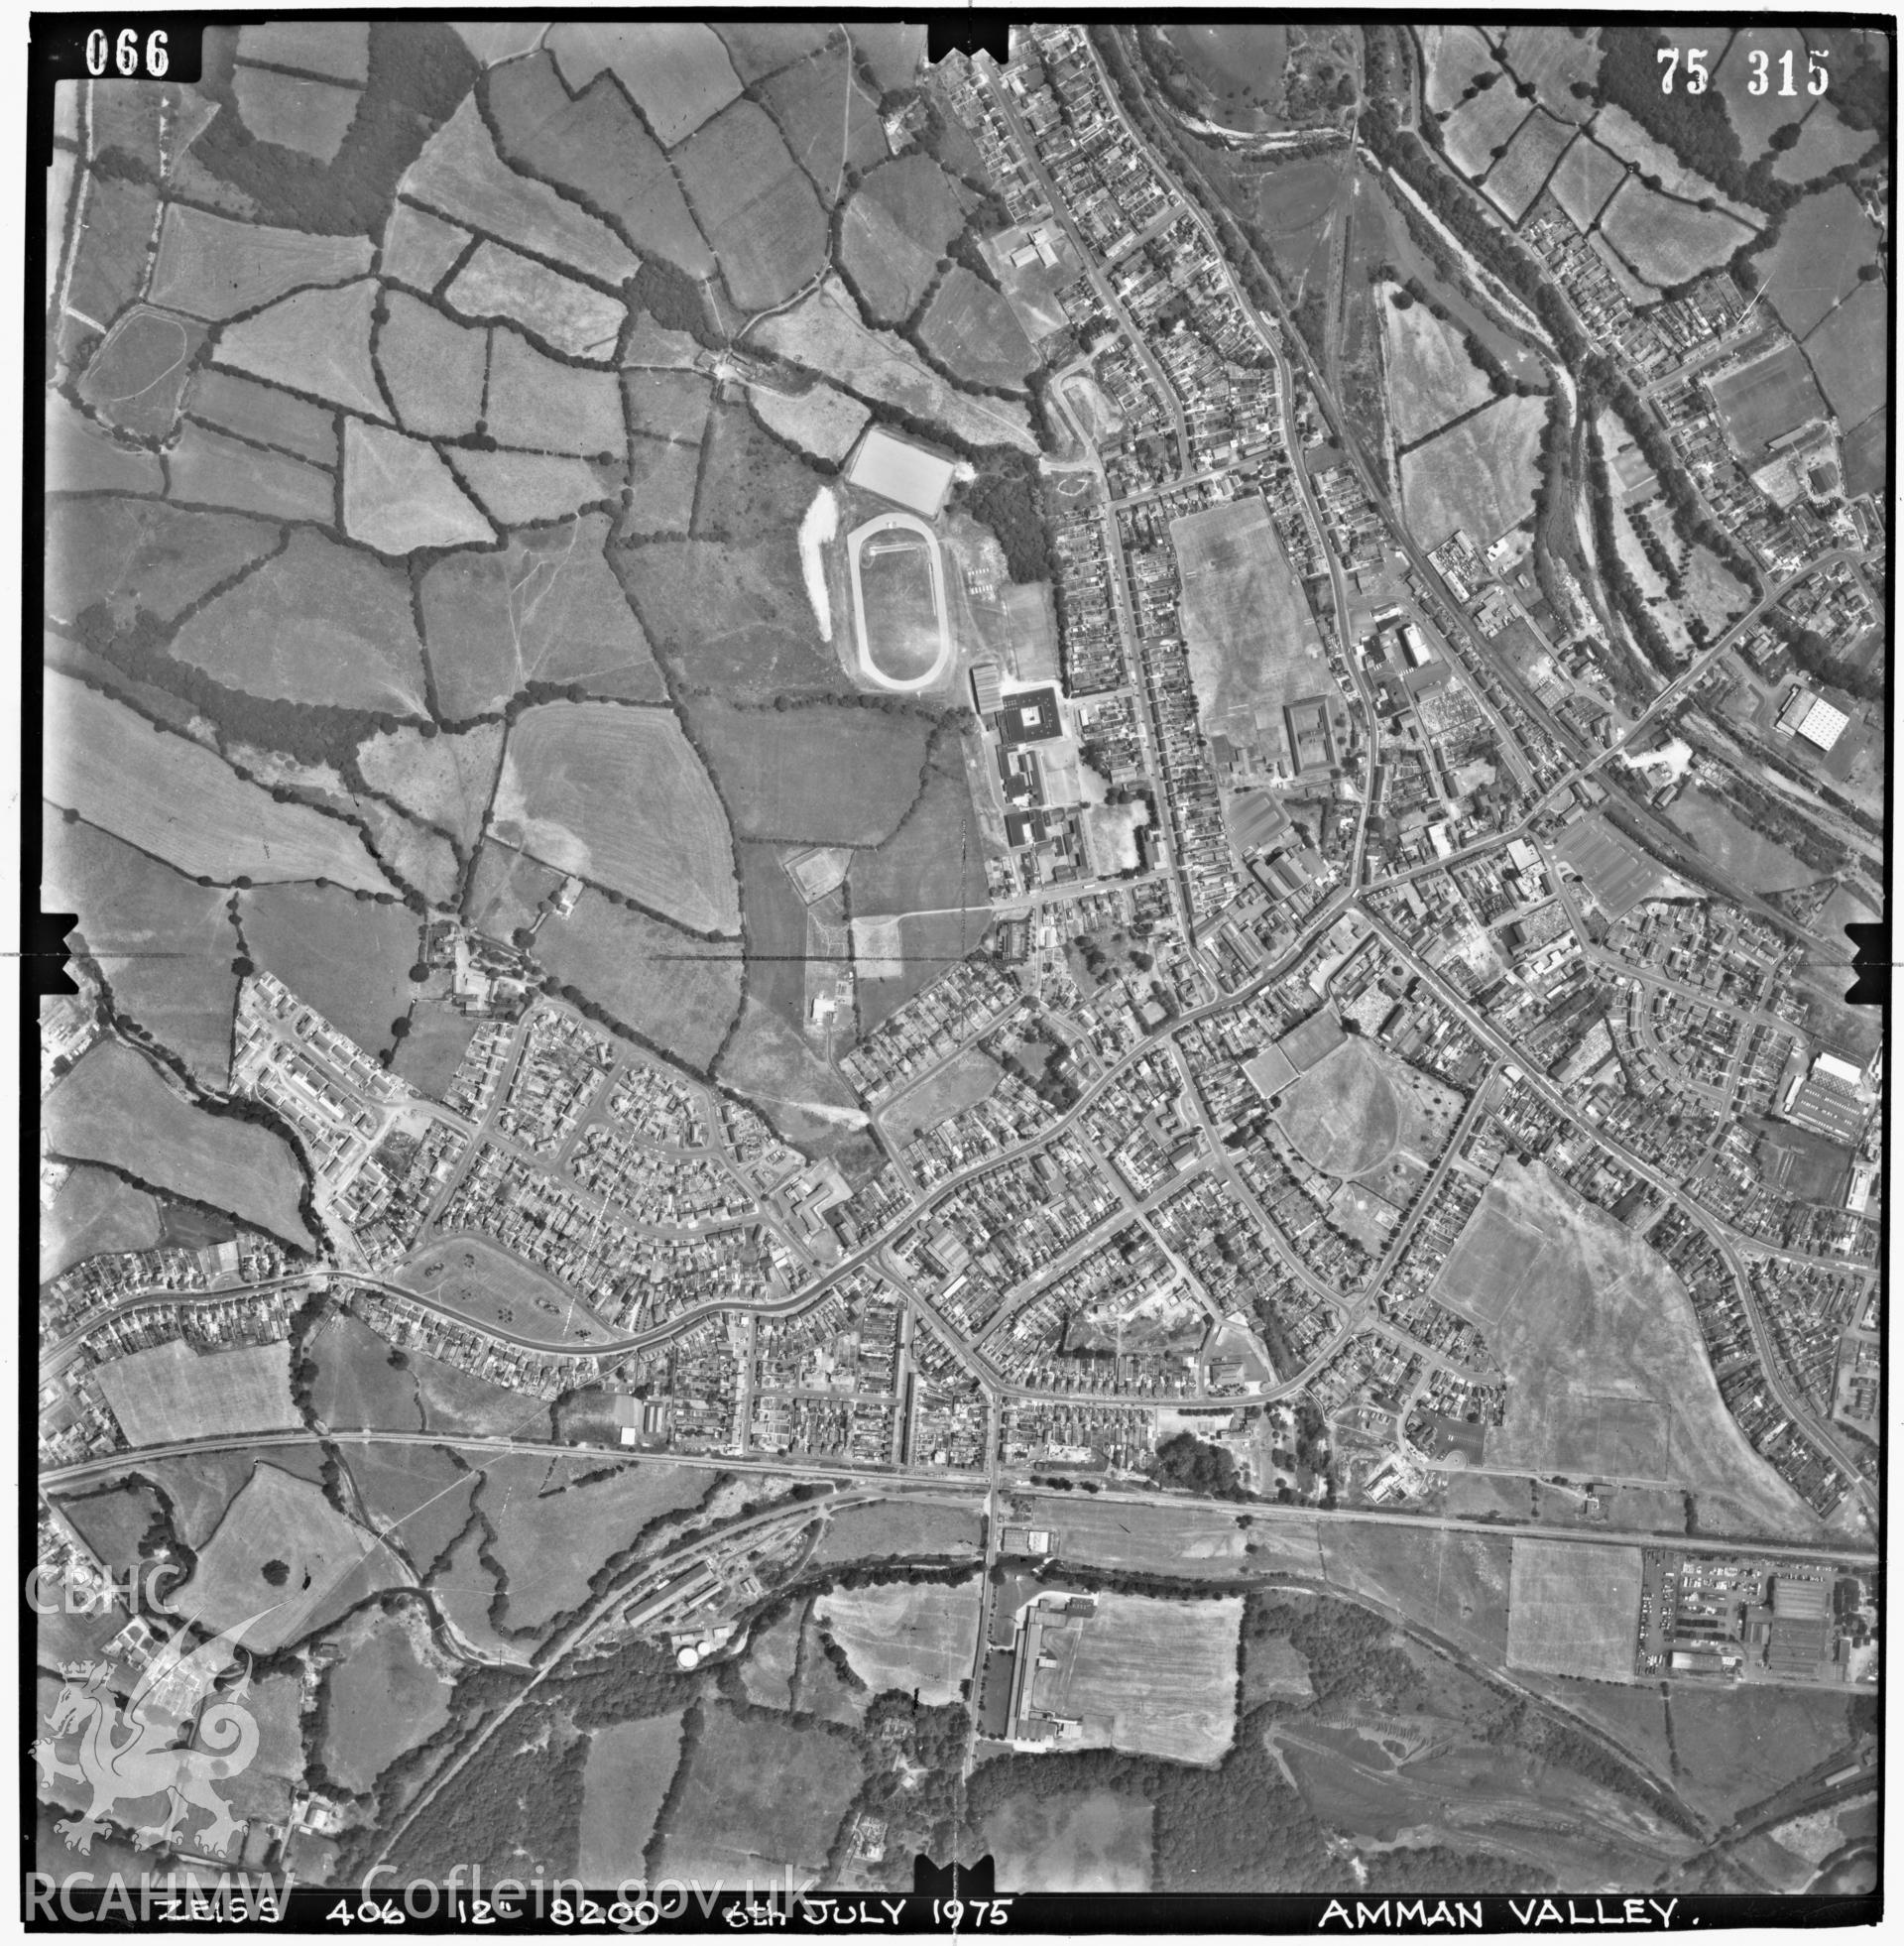 Digitized copy of an aerial photograph showing Ammanford area, taken by Ordnance Survey, 1975.